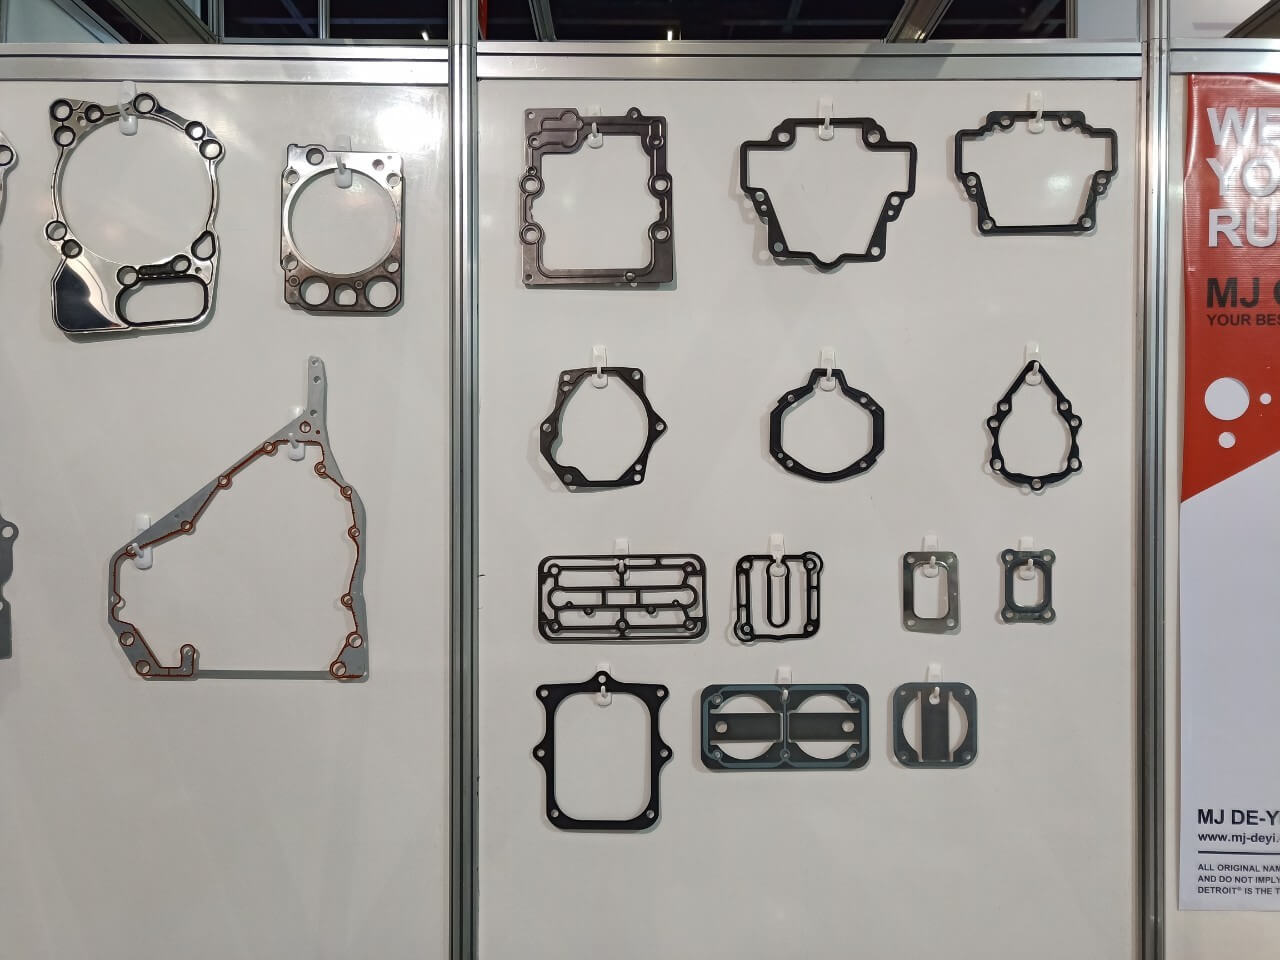 MJ GASKET's display gaskets in the Automec Show 2019